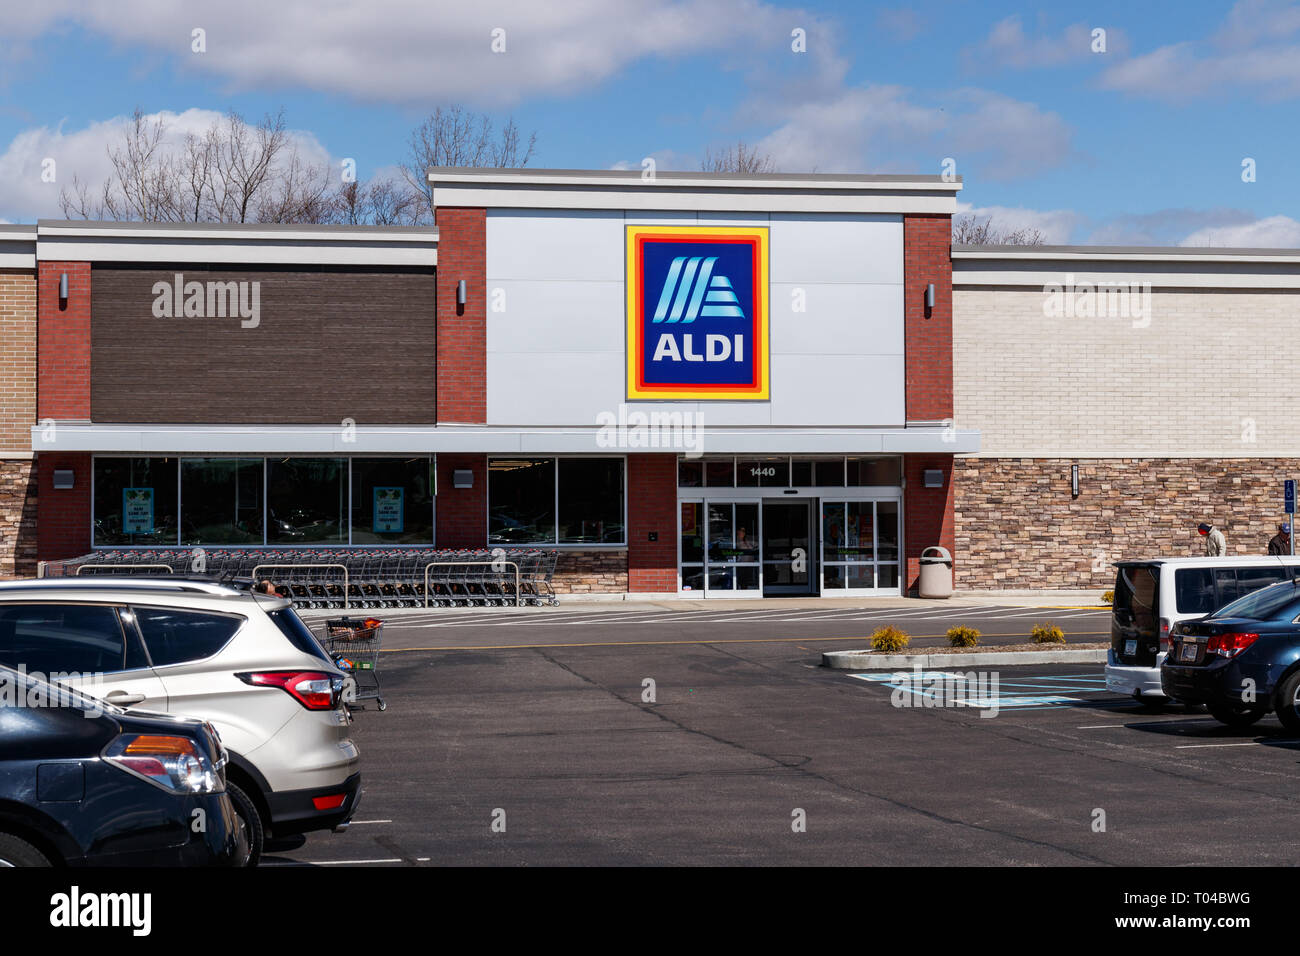 Indianapolis - Circa March 2019: Aldi Discount Supermarket. Aldi sells a range of grocery items, including produce, meat & dairy, at discount prices I Stock Photo